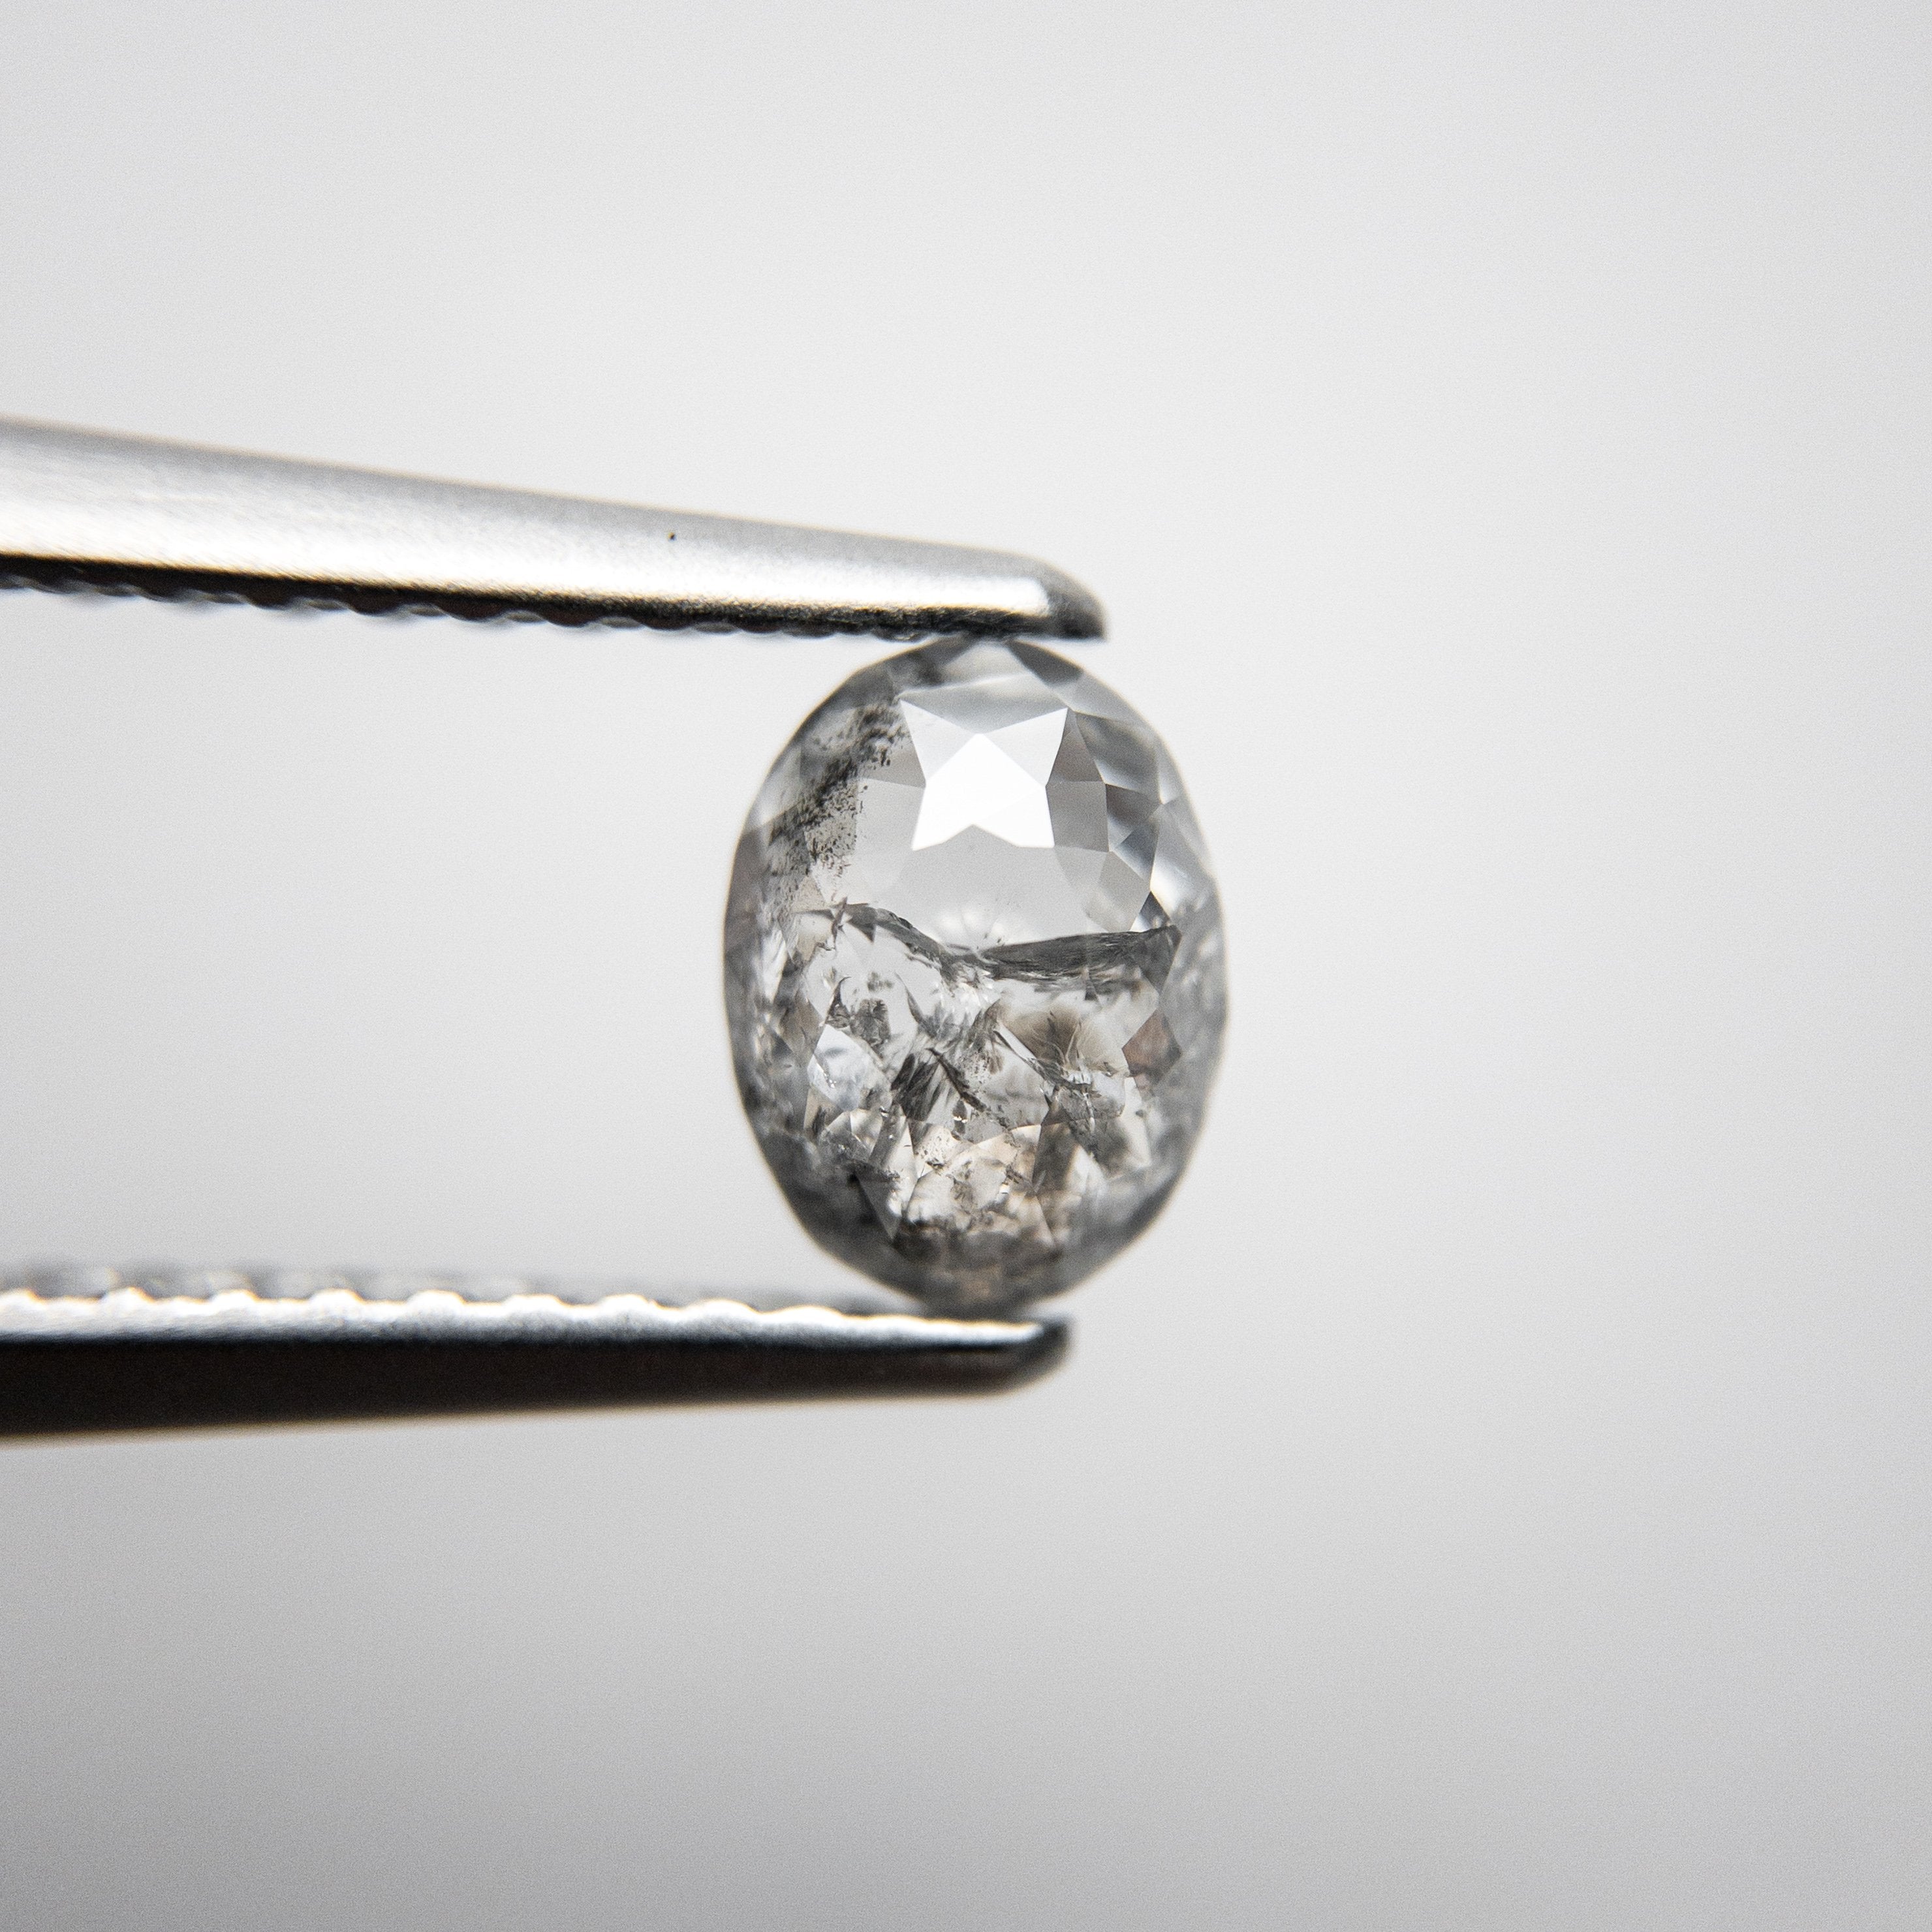 0.84ct 6.51x4.86x2.71mm Oval Rosecut 18288-05 HOLD D1297 10/18/20